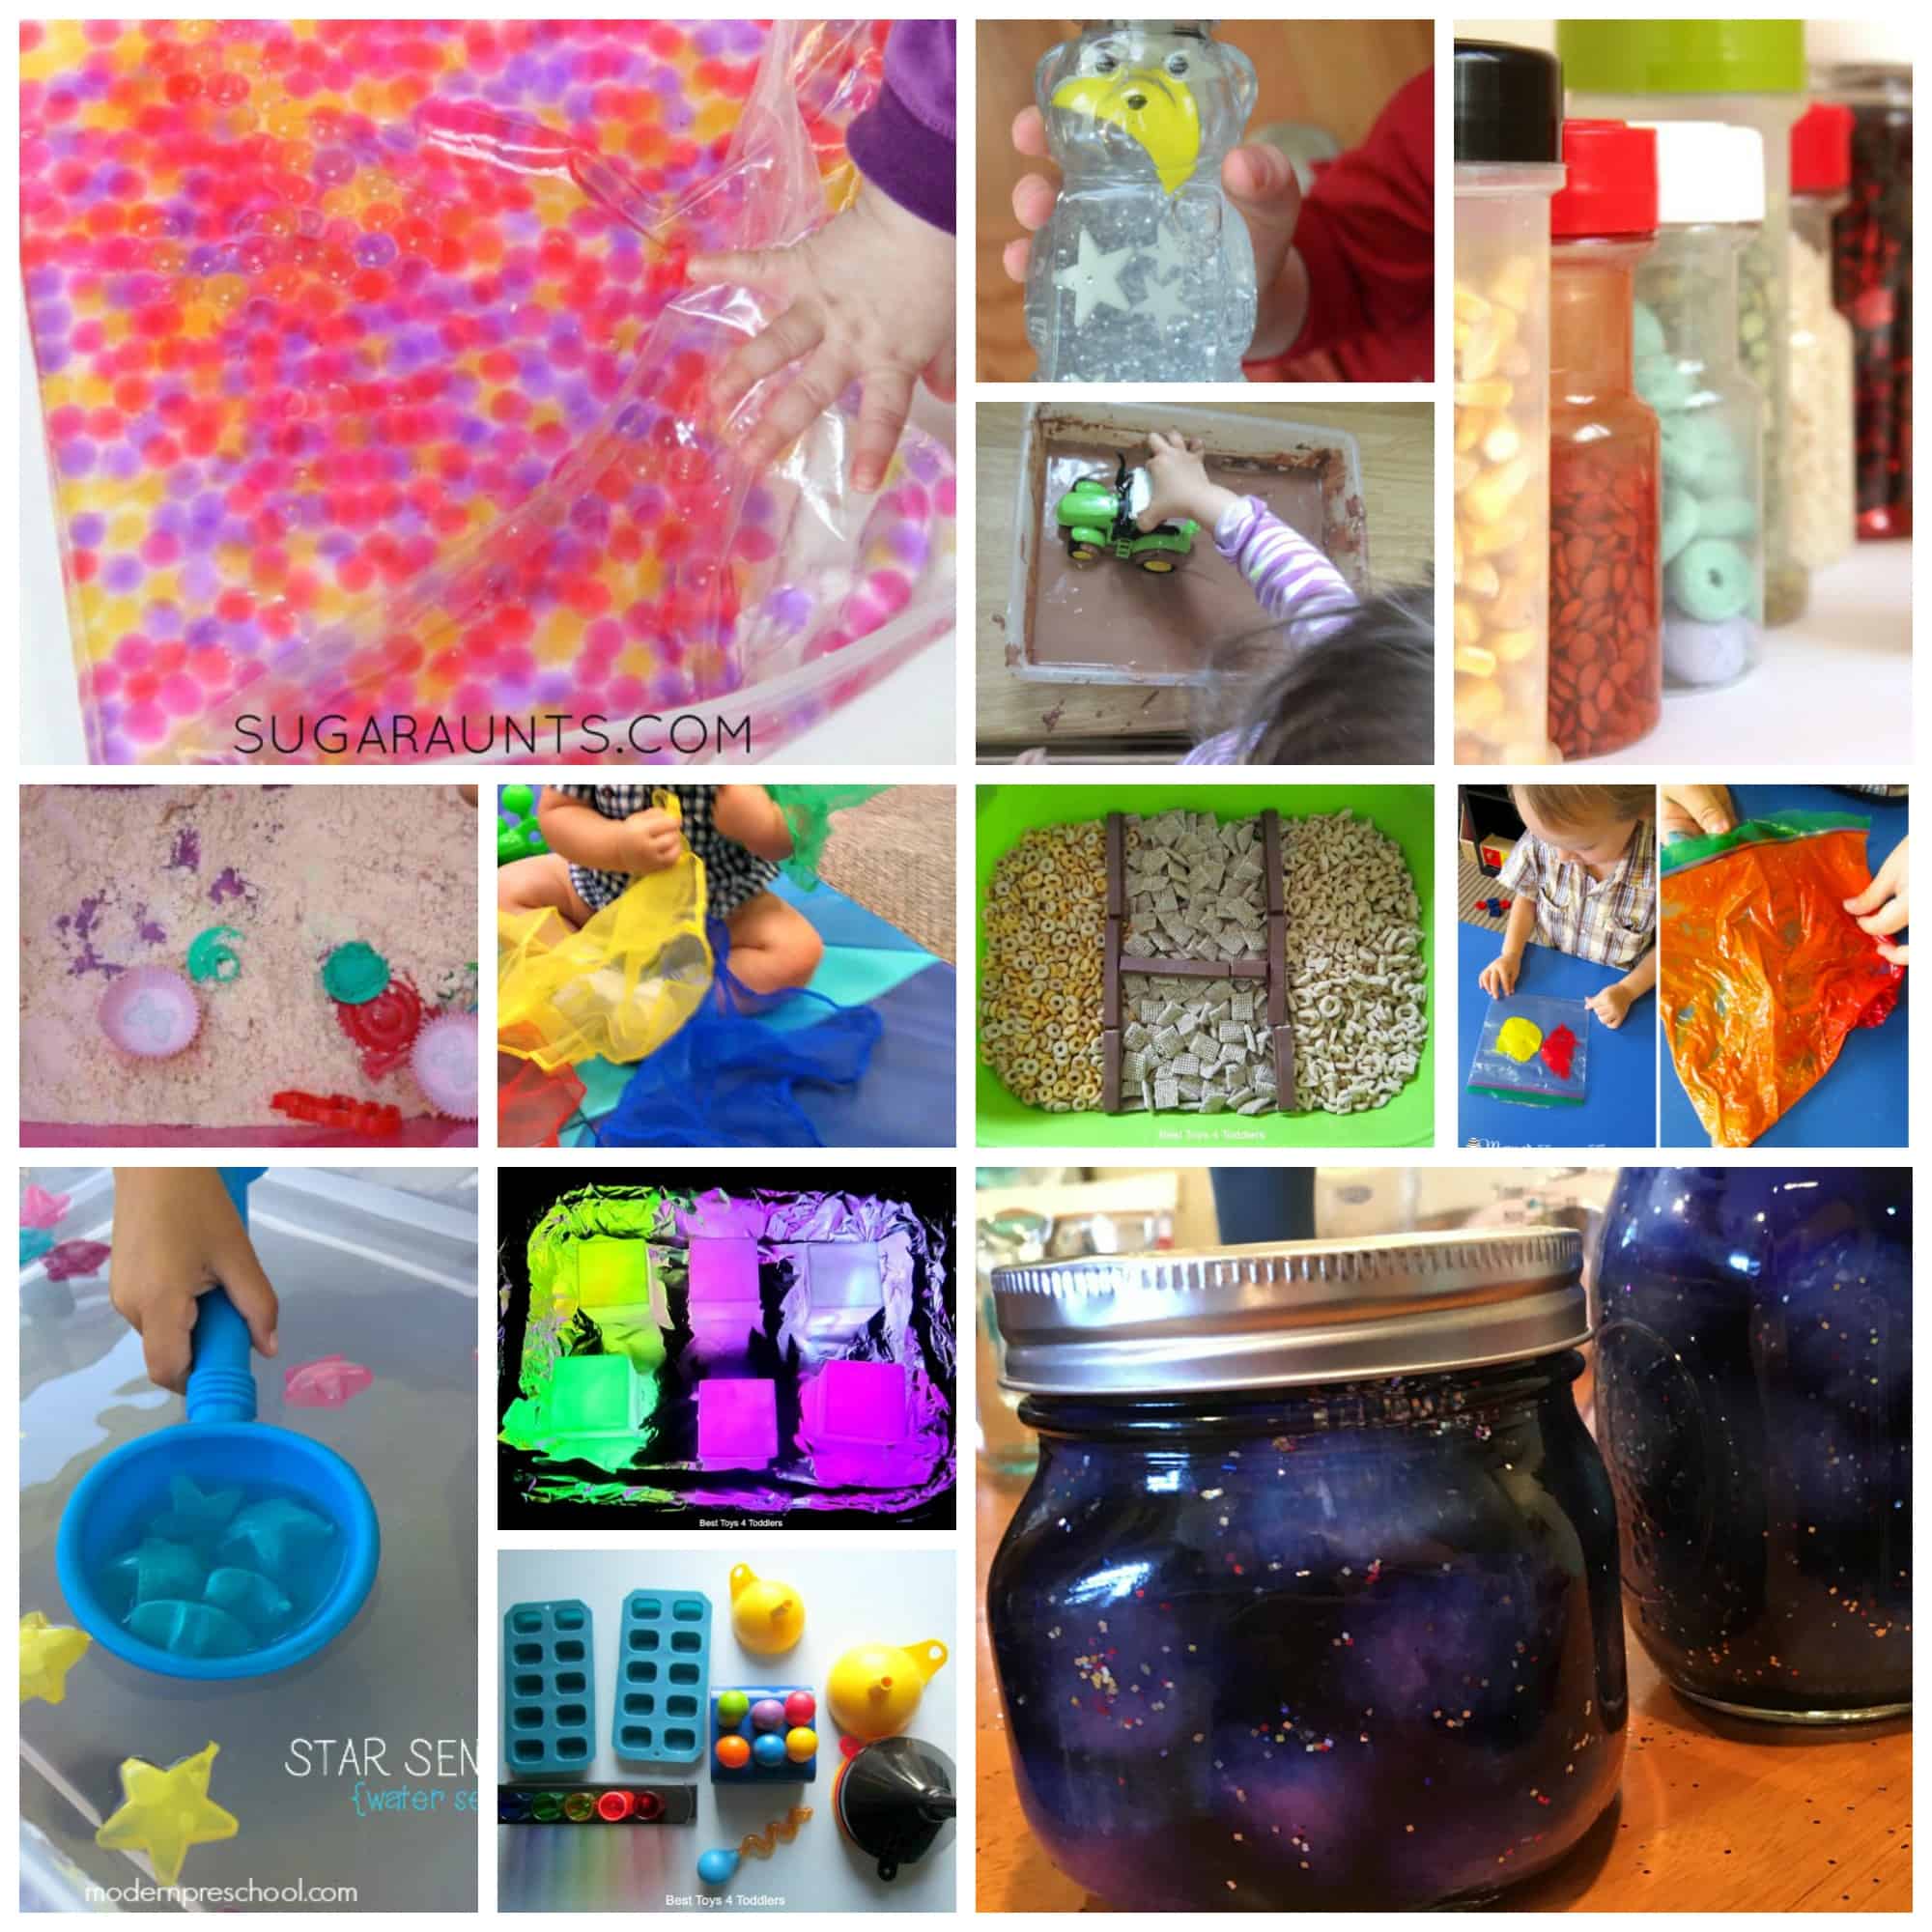 sensory activities a one year old can do too!